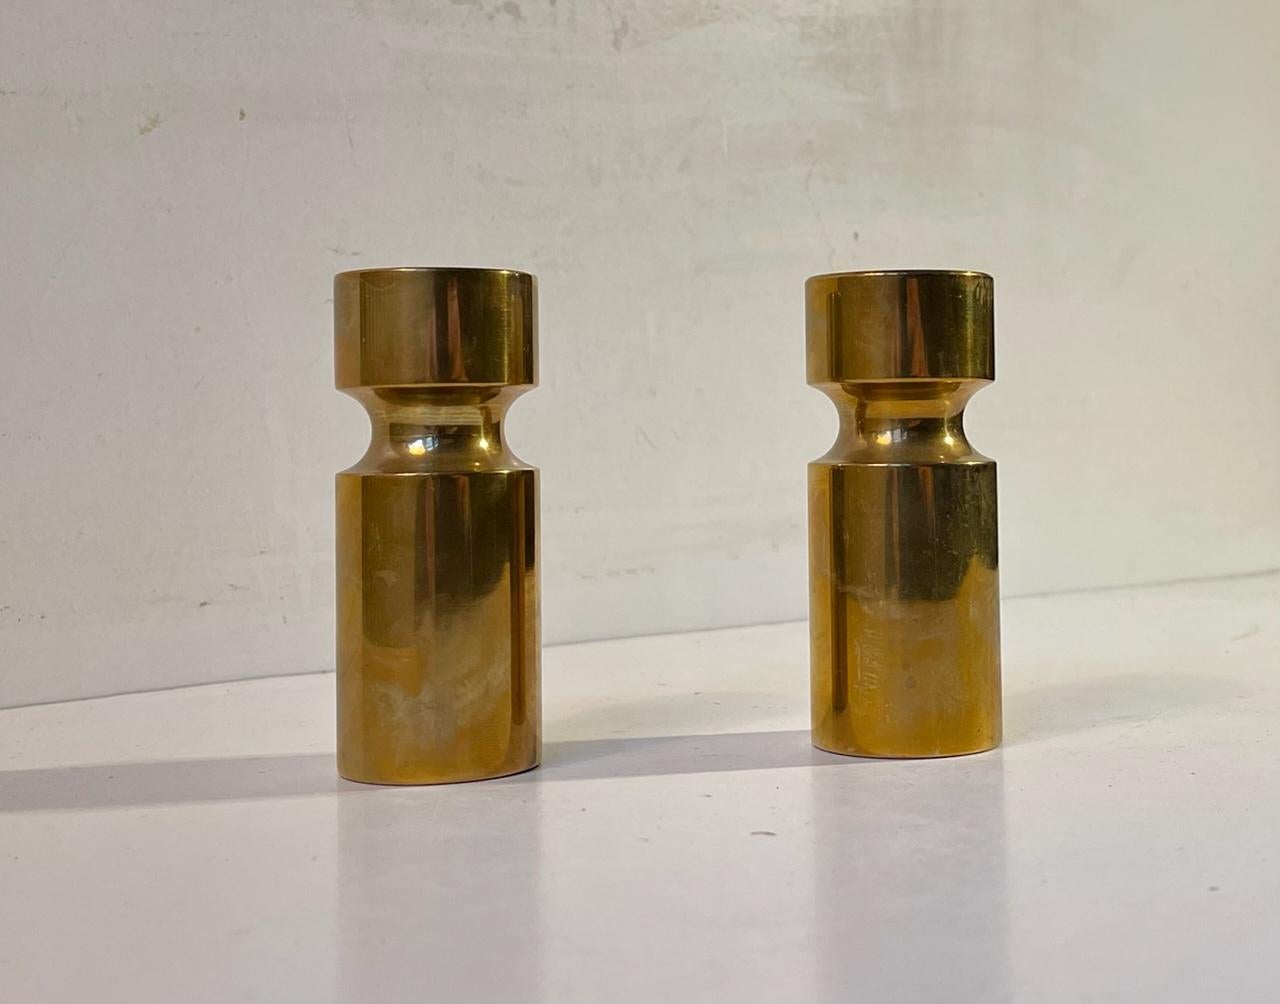 A pair of small yet heavy candle holders composed of engine-turned solid bronze. Their are to be installed with regular sized candles. Manufactured anonymously in Scandinavia during the 1930s or 40s. Measurements: H: 9.5 cm, D: 3.8 cm.